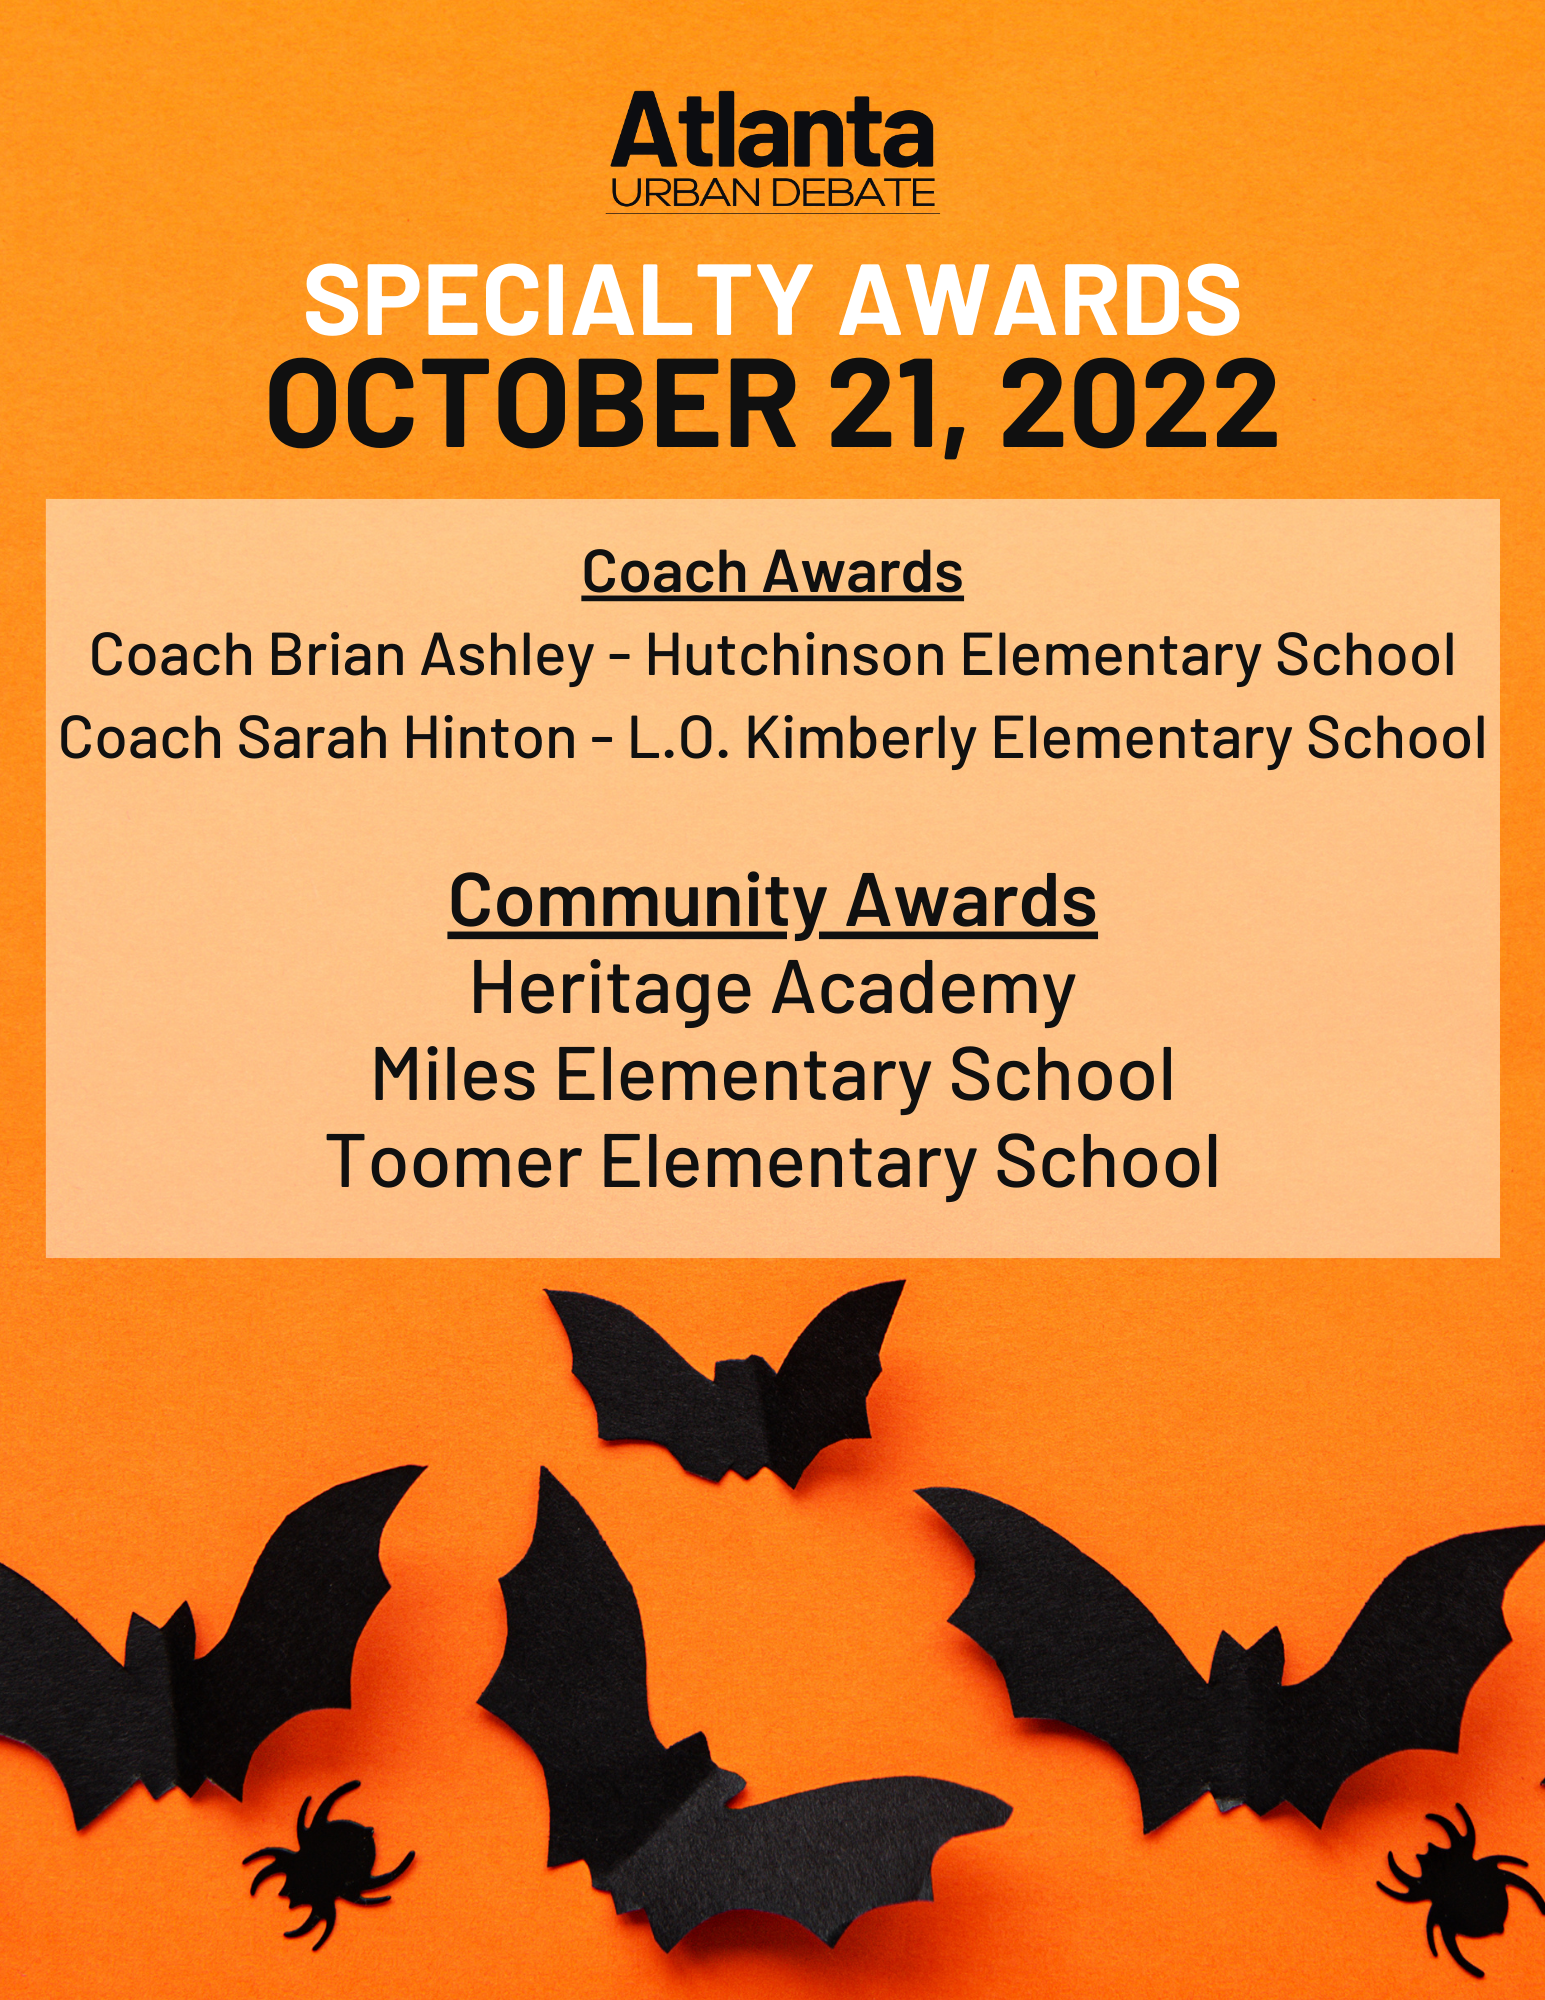 2022-10-22 Specialty Awards Announcements.png